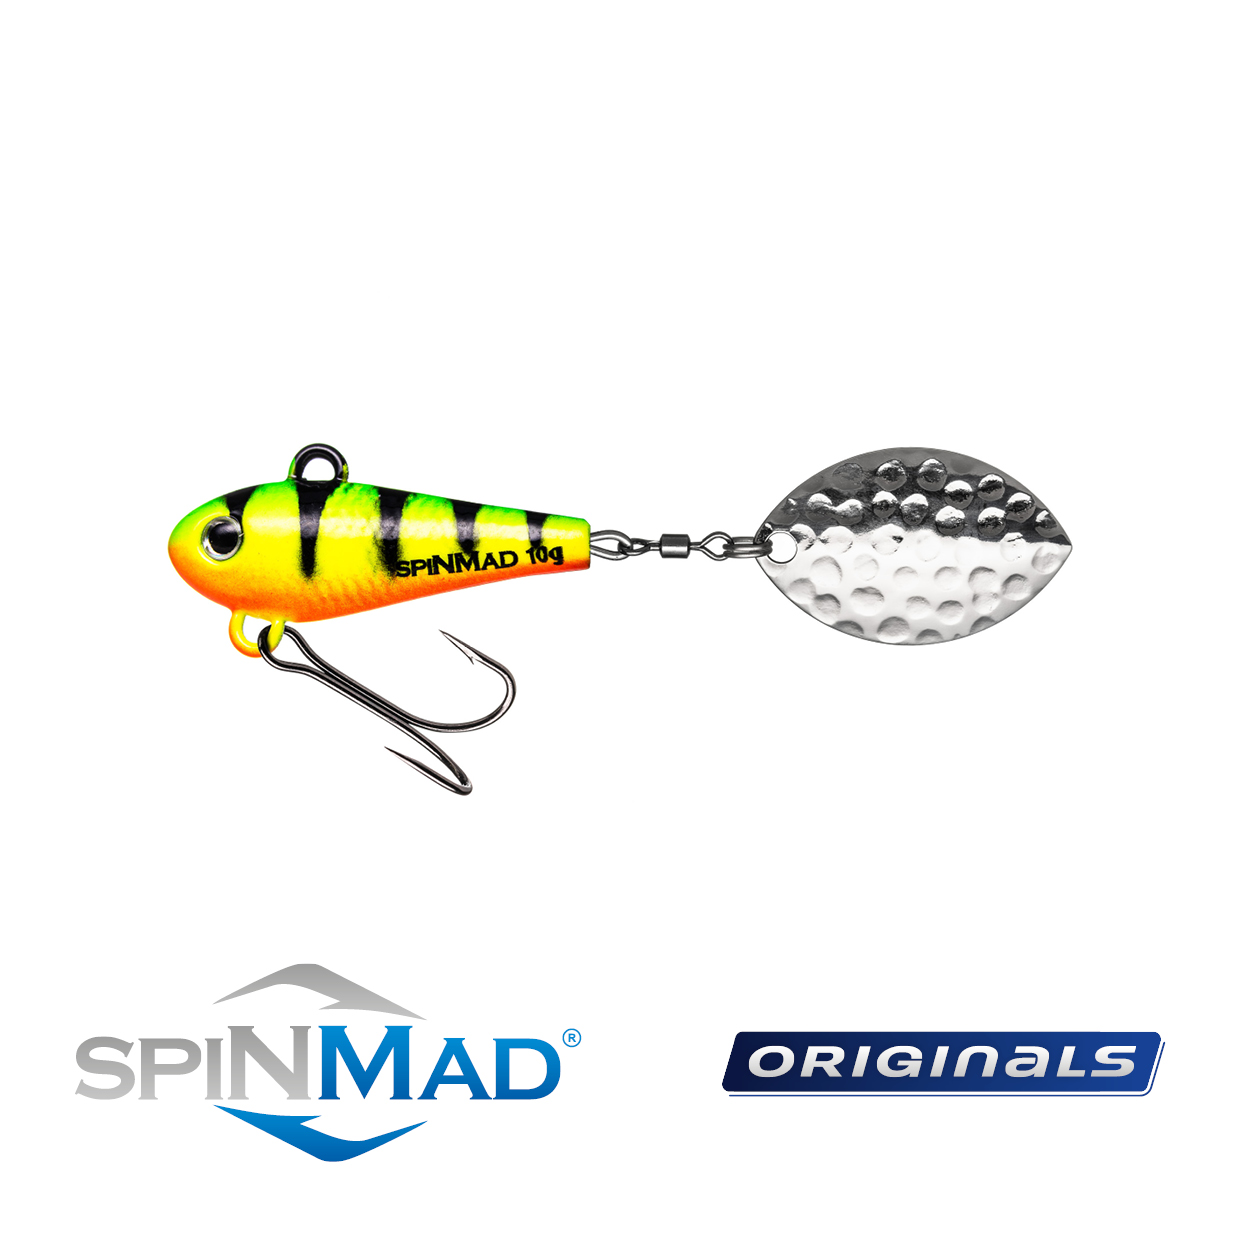 Spinning Tail JIGMASTER 12g Spinmad Lure Spinner Fishing Perch Chub Zander Pike